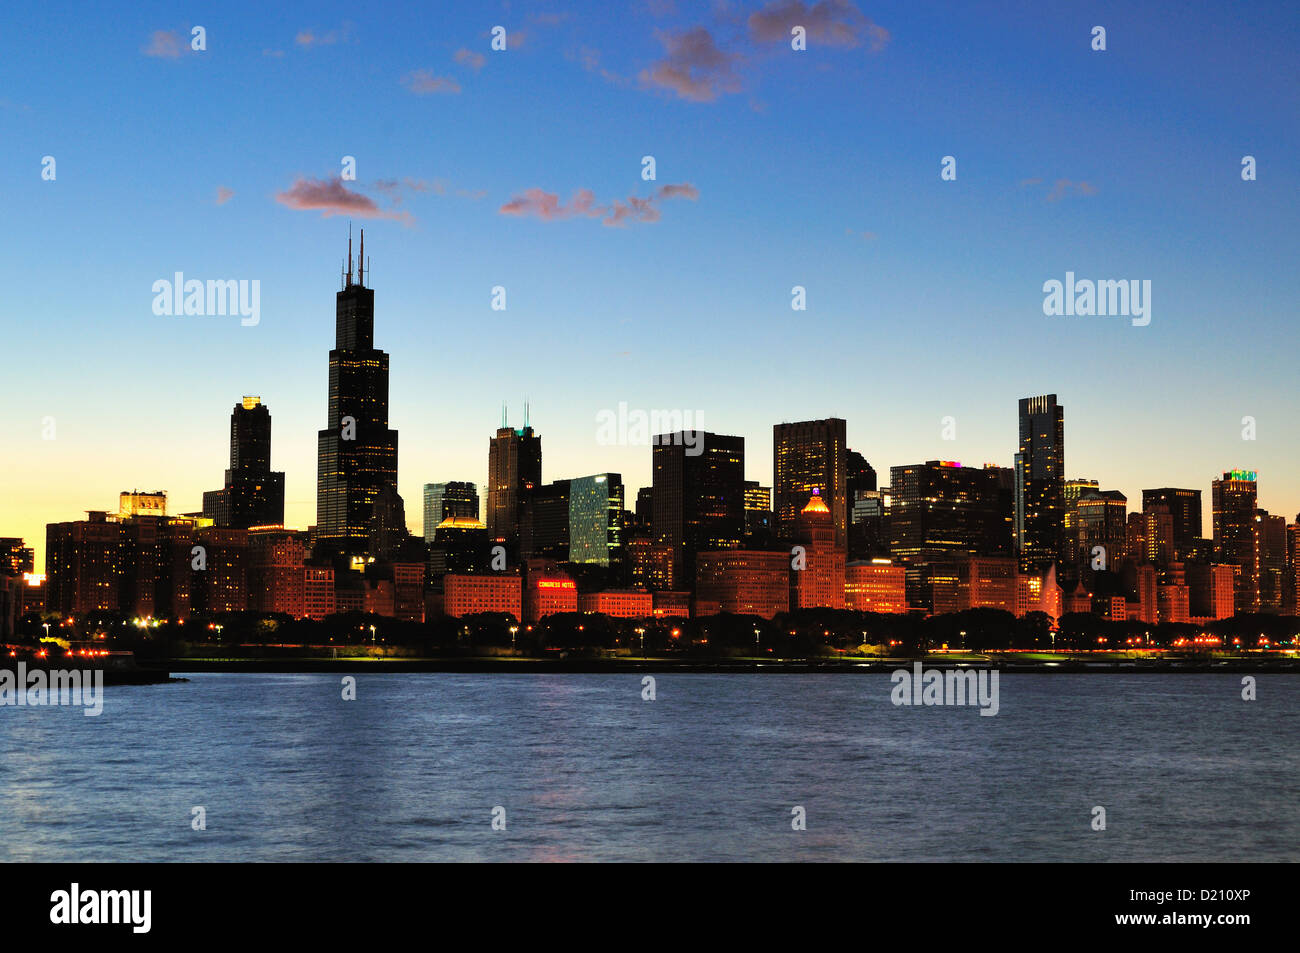 USA Illinois Chicago Loop Willis Tower (formerly Sears Tower) dominating the city skyline at dusk. Stock Photo